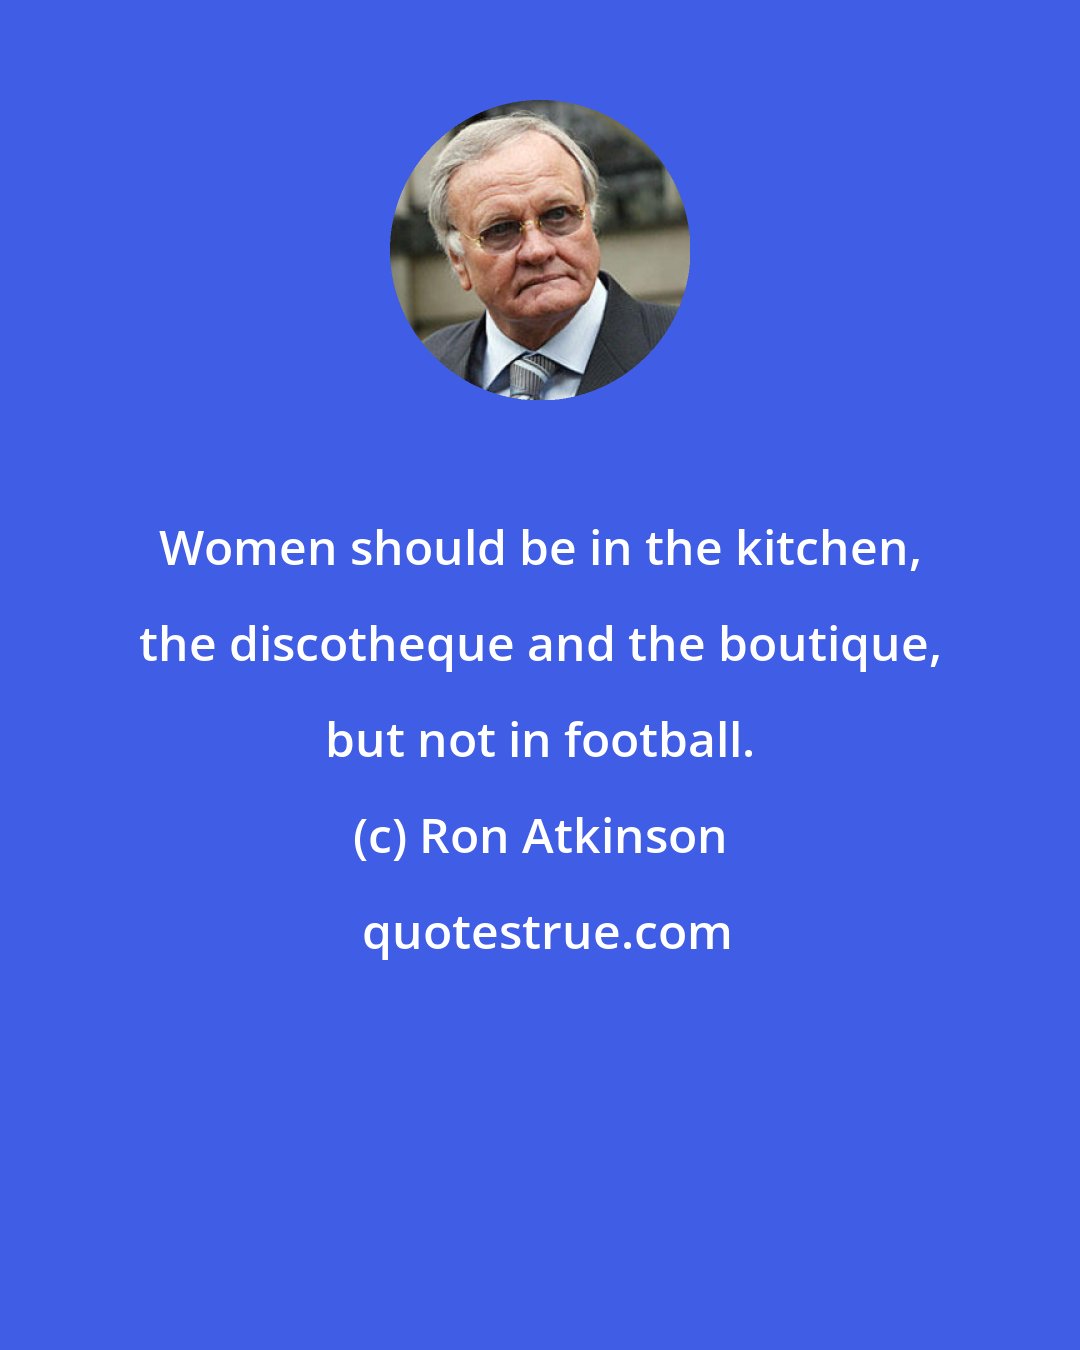 Ron Atkinson: Women should be in the kitchen, the discotheque and the boutique, but not in football.